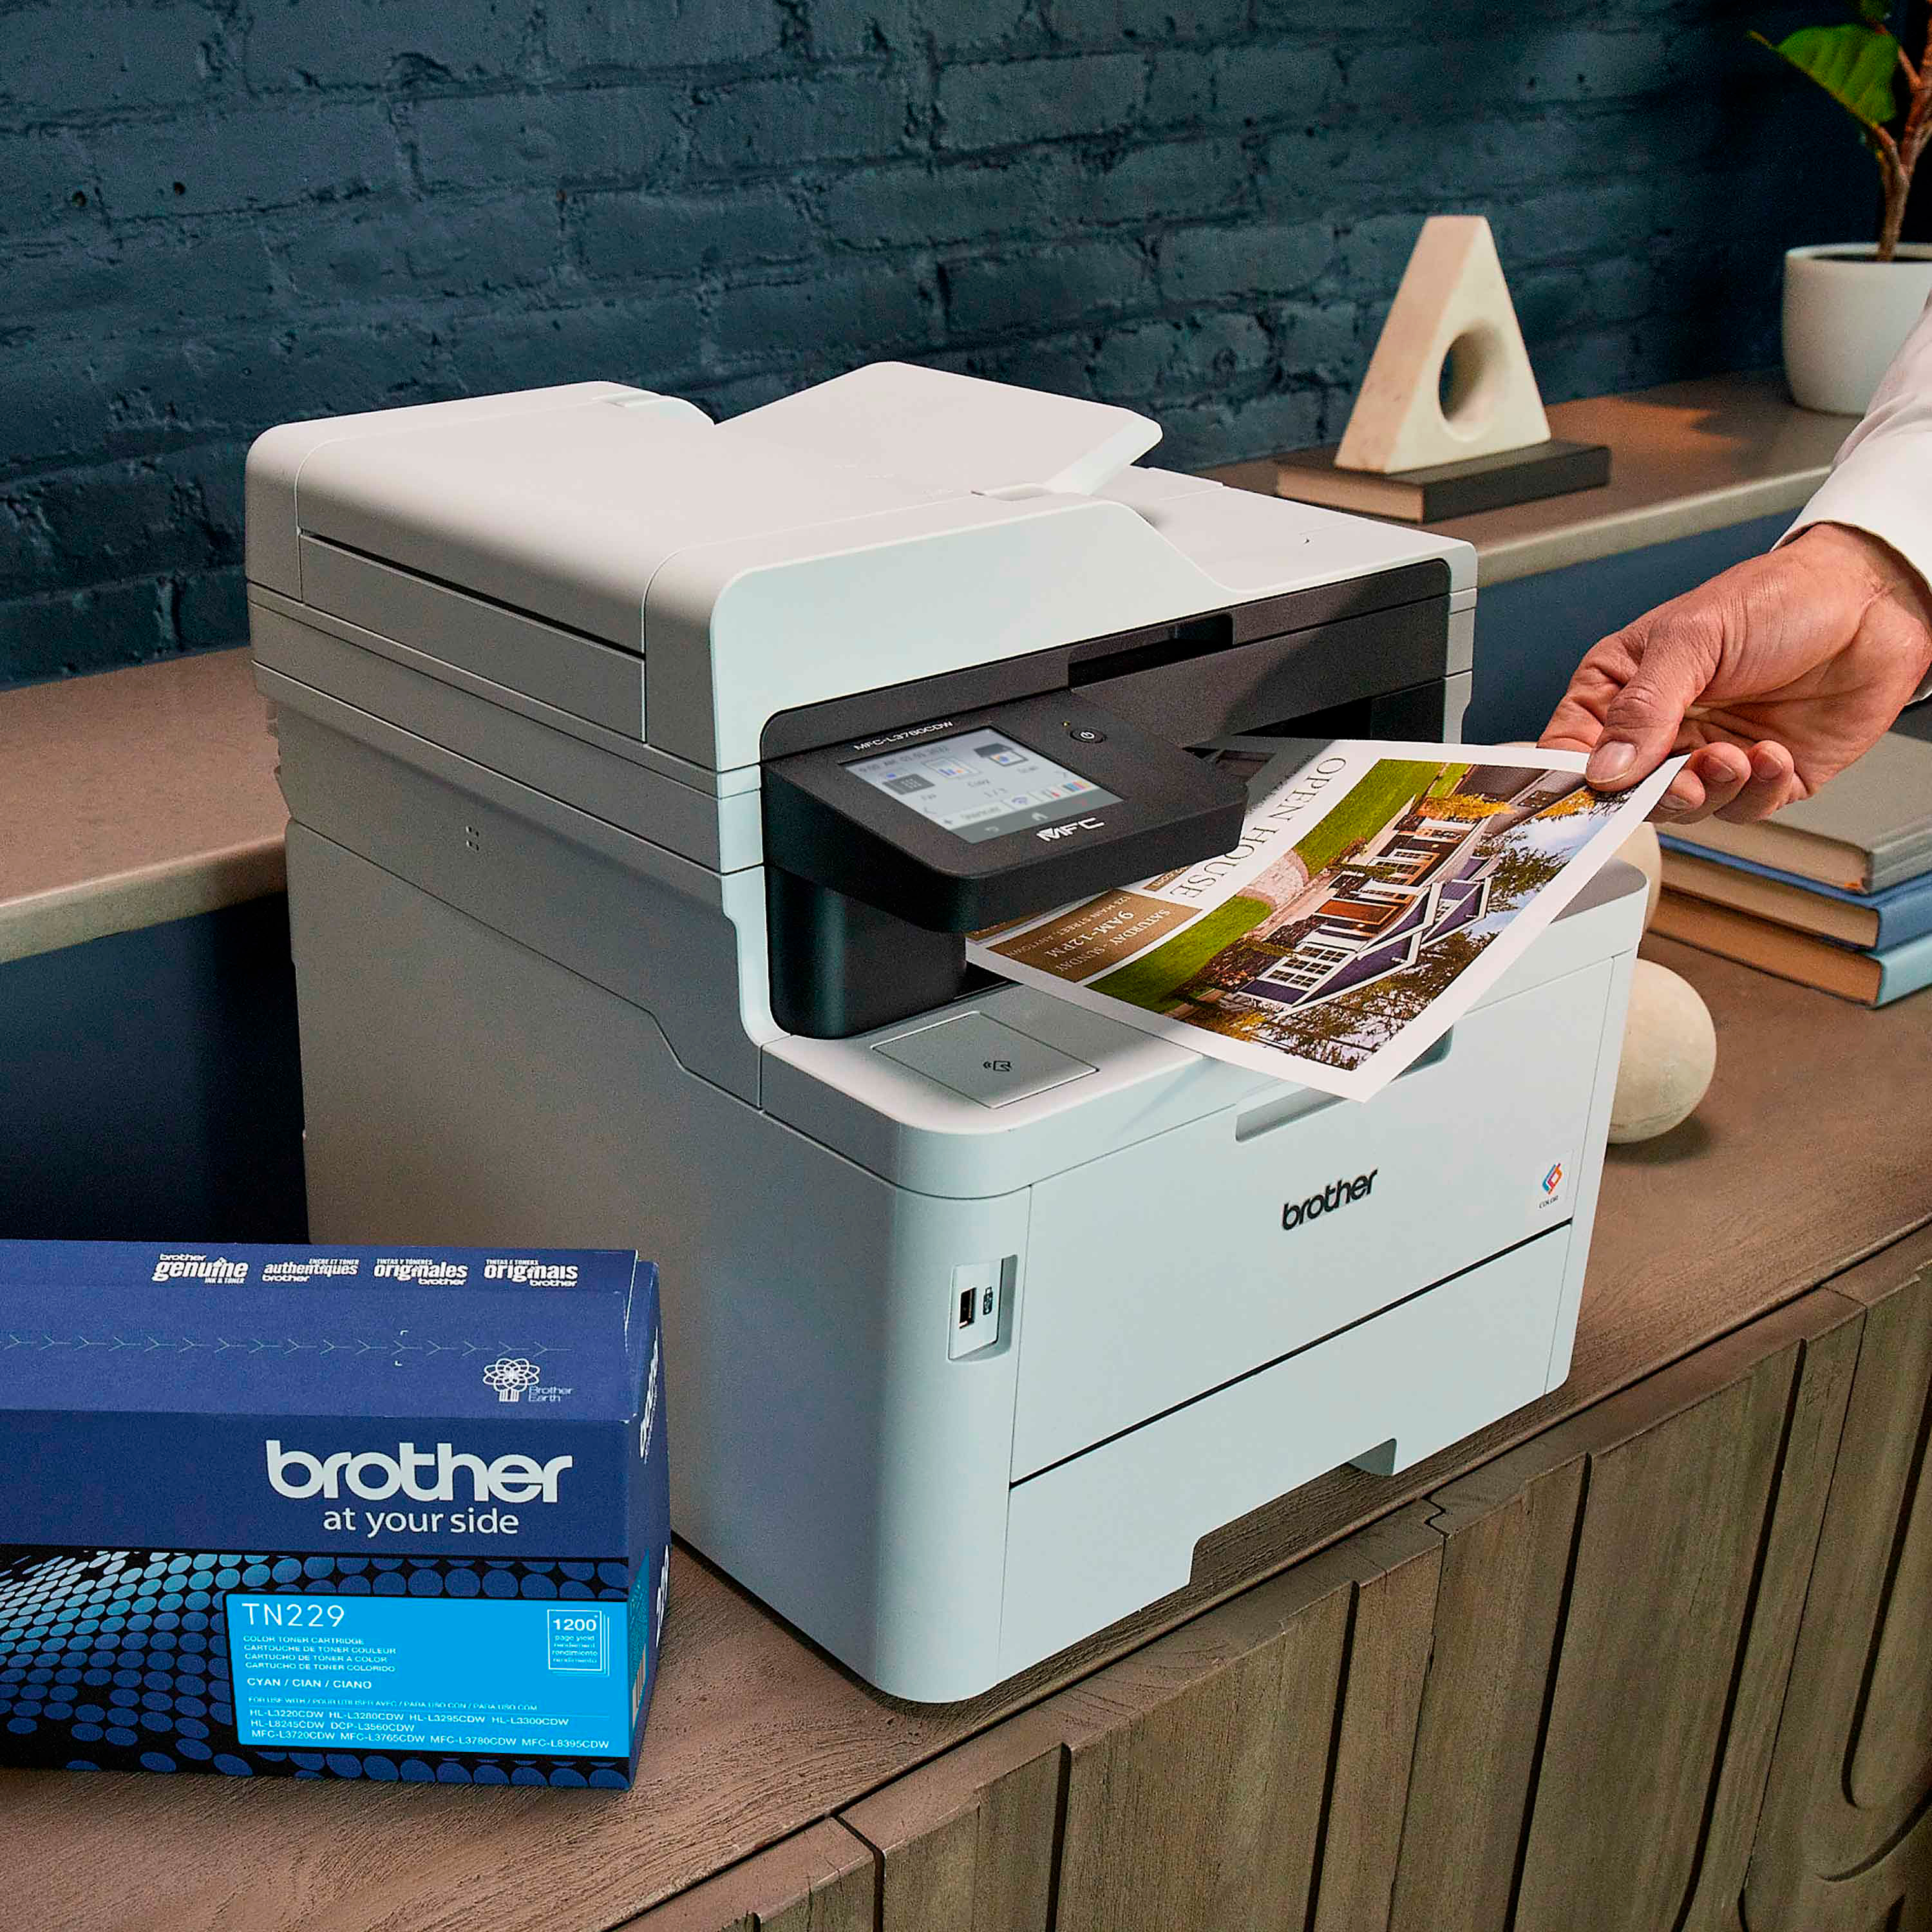 Brother MFC-L3750CDW Multifunction Printer Specifications and Datasheet